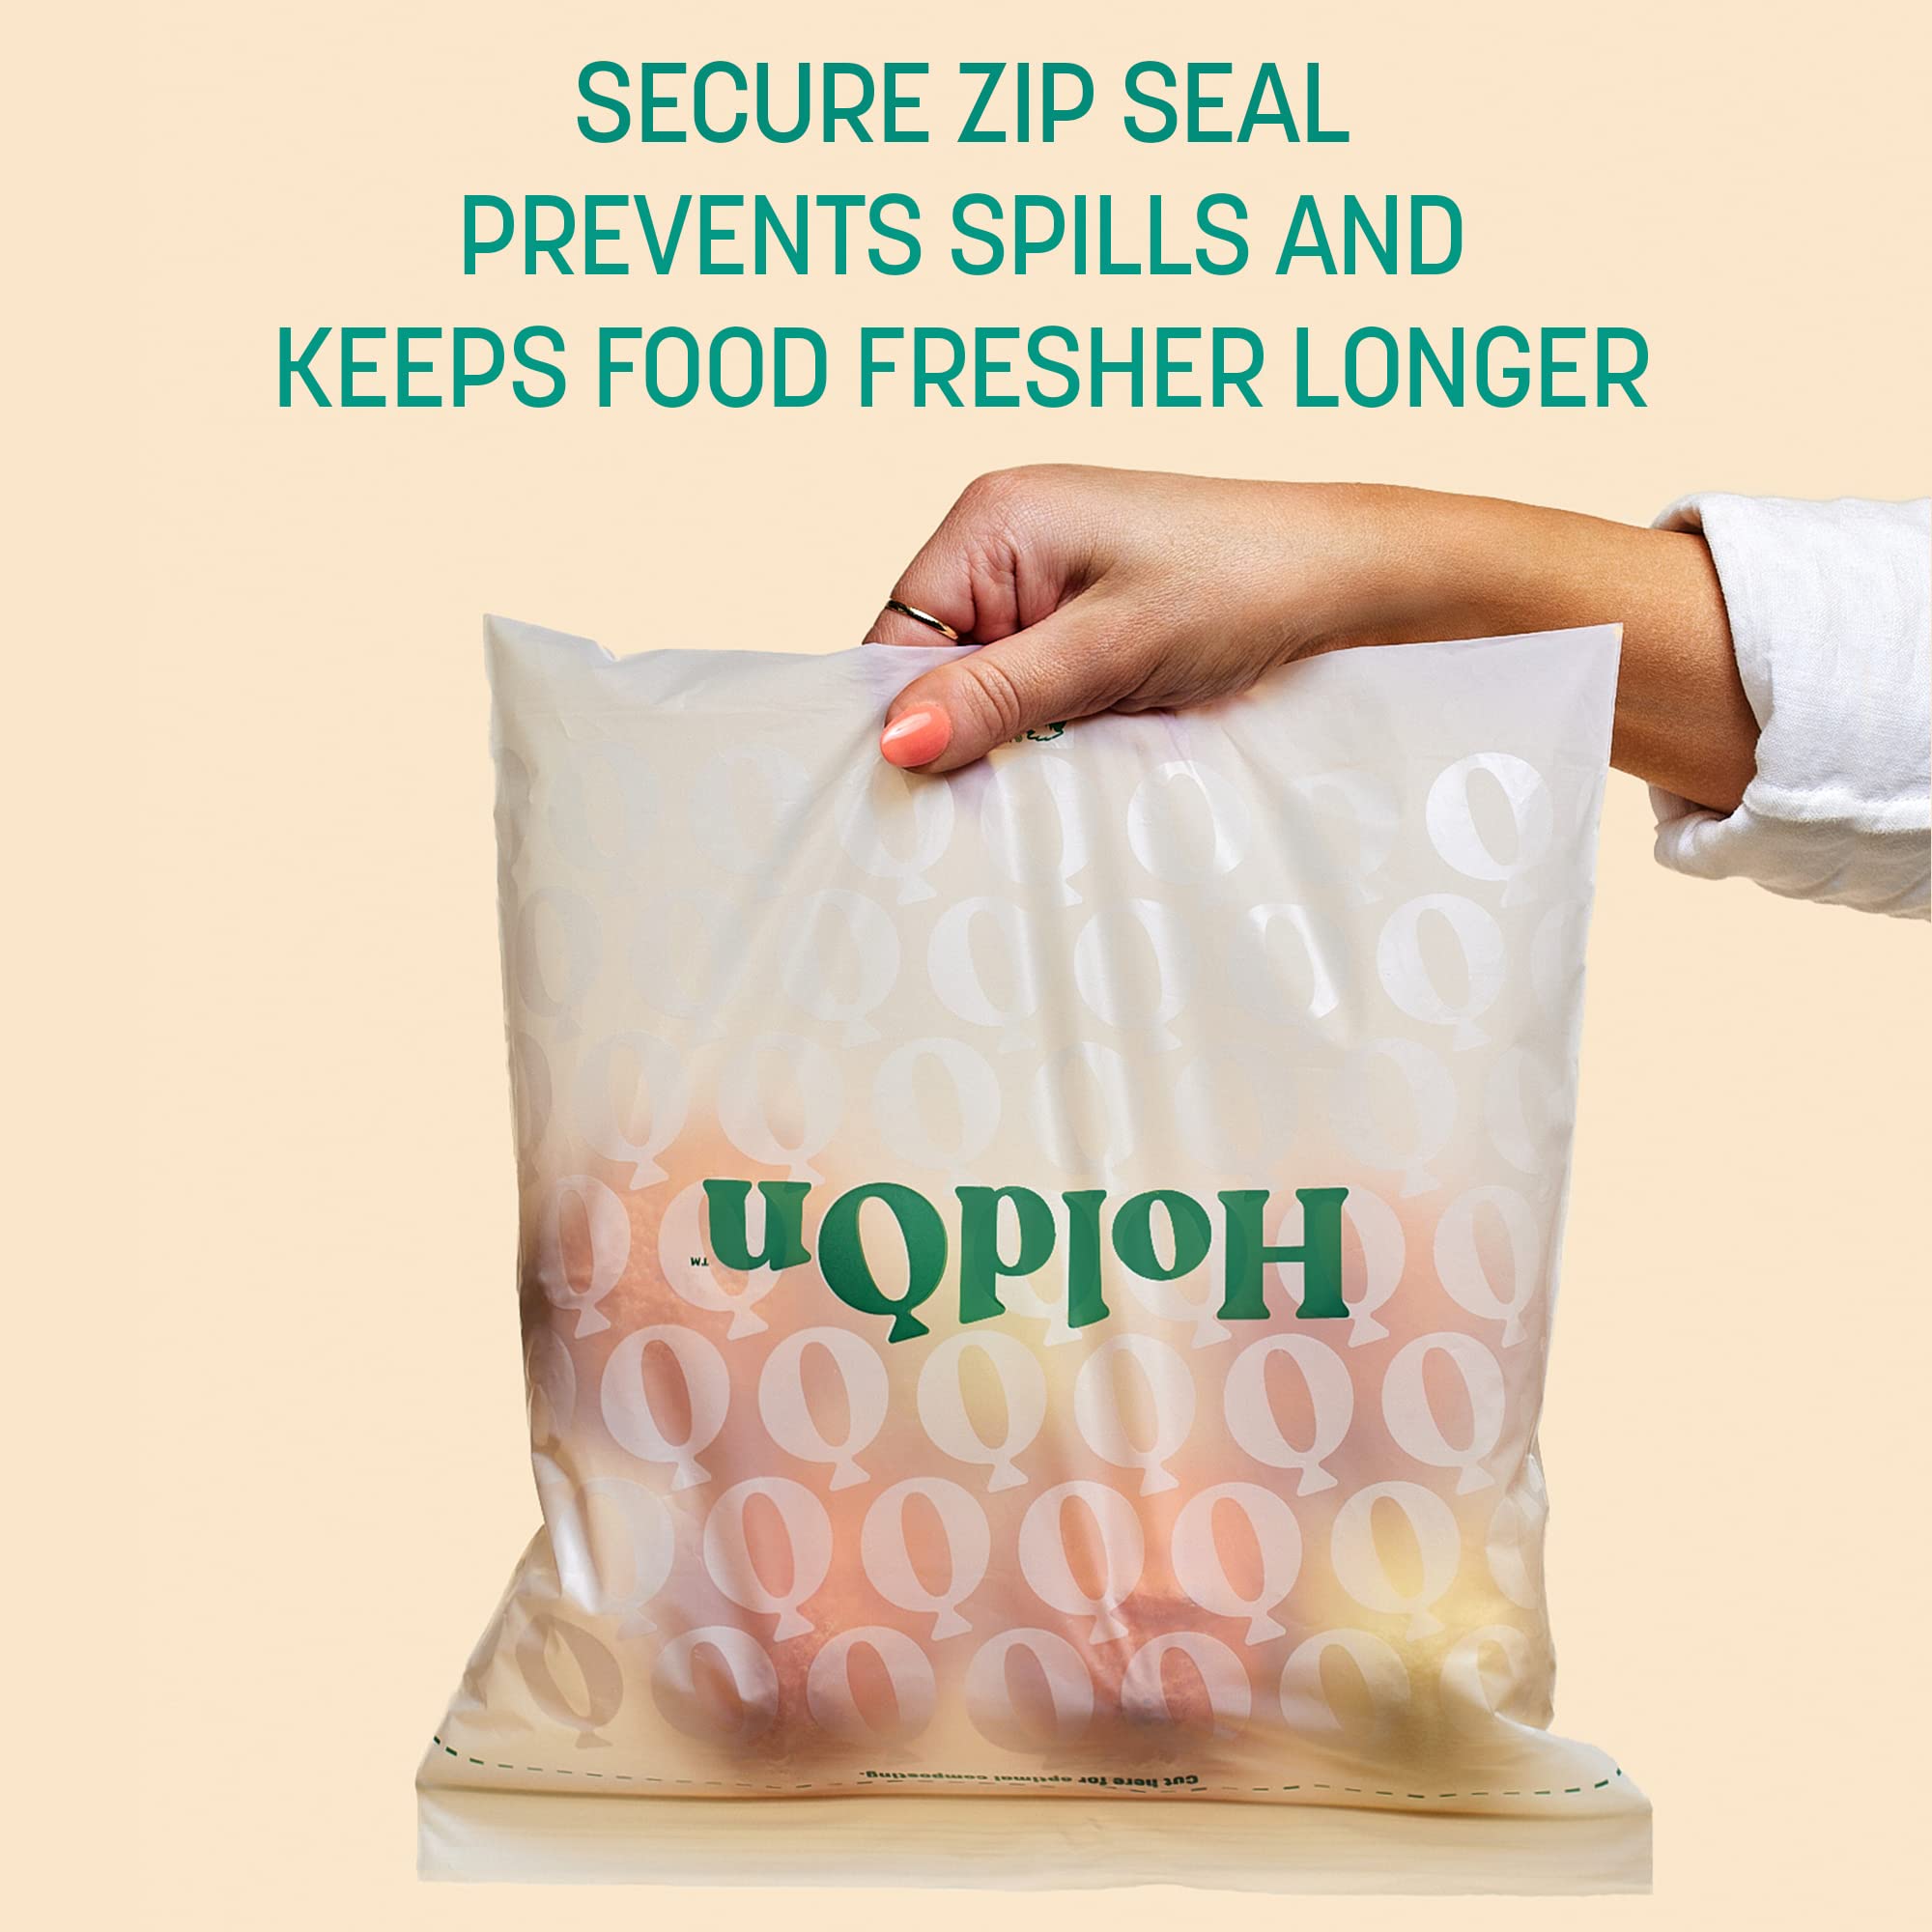 HoldOn Zipseal Gallon Bags - Plastic-free, Plant-Based and Food-Safe Zip Seal Food Storage Bags/Freezer Gallon Bags With Secure Seal for Home & Travel (2-pack, 50 bags total)